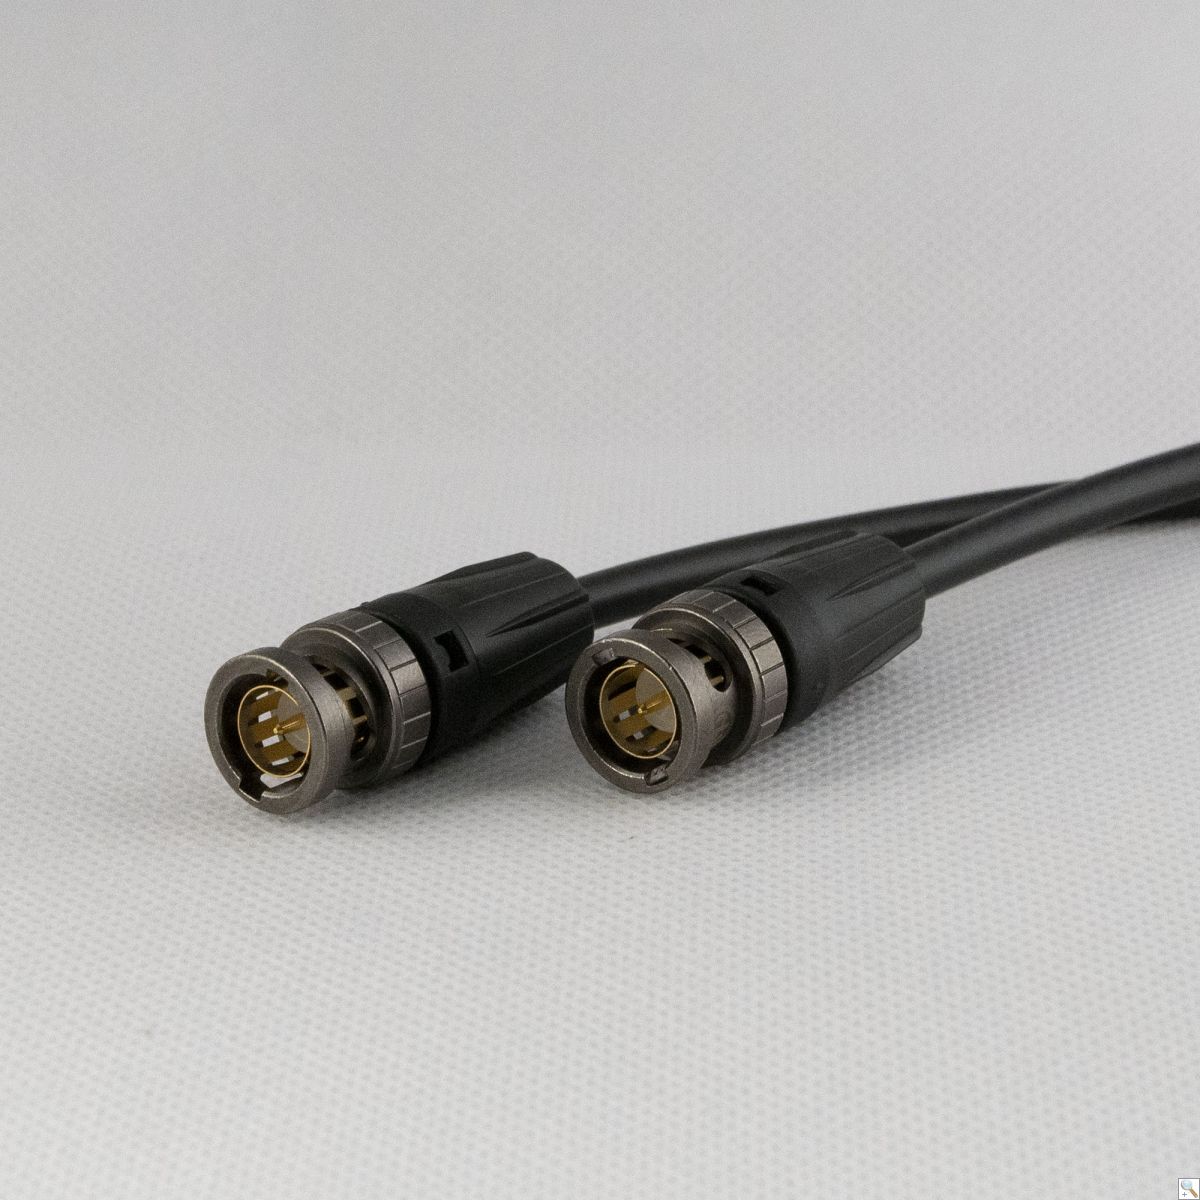 4K UHD video patch cable - Belden 4855R 